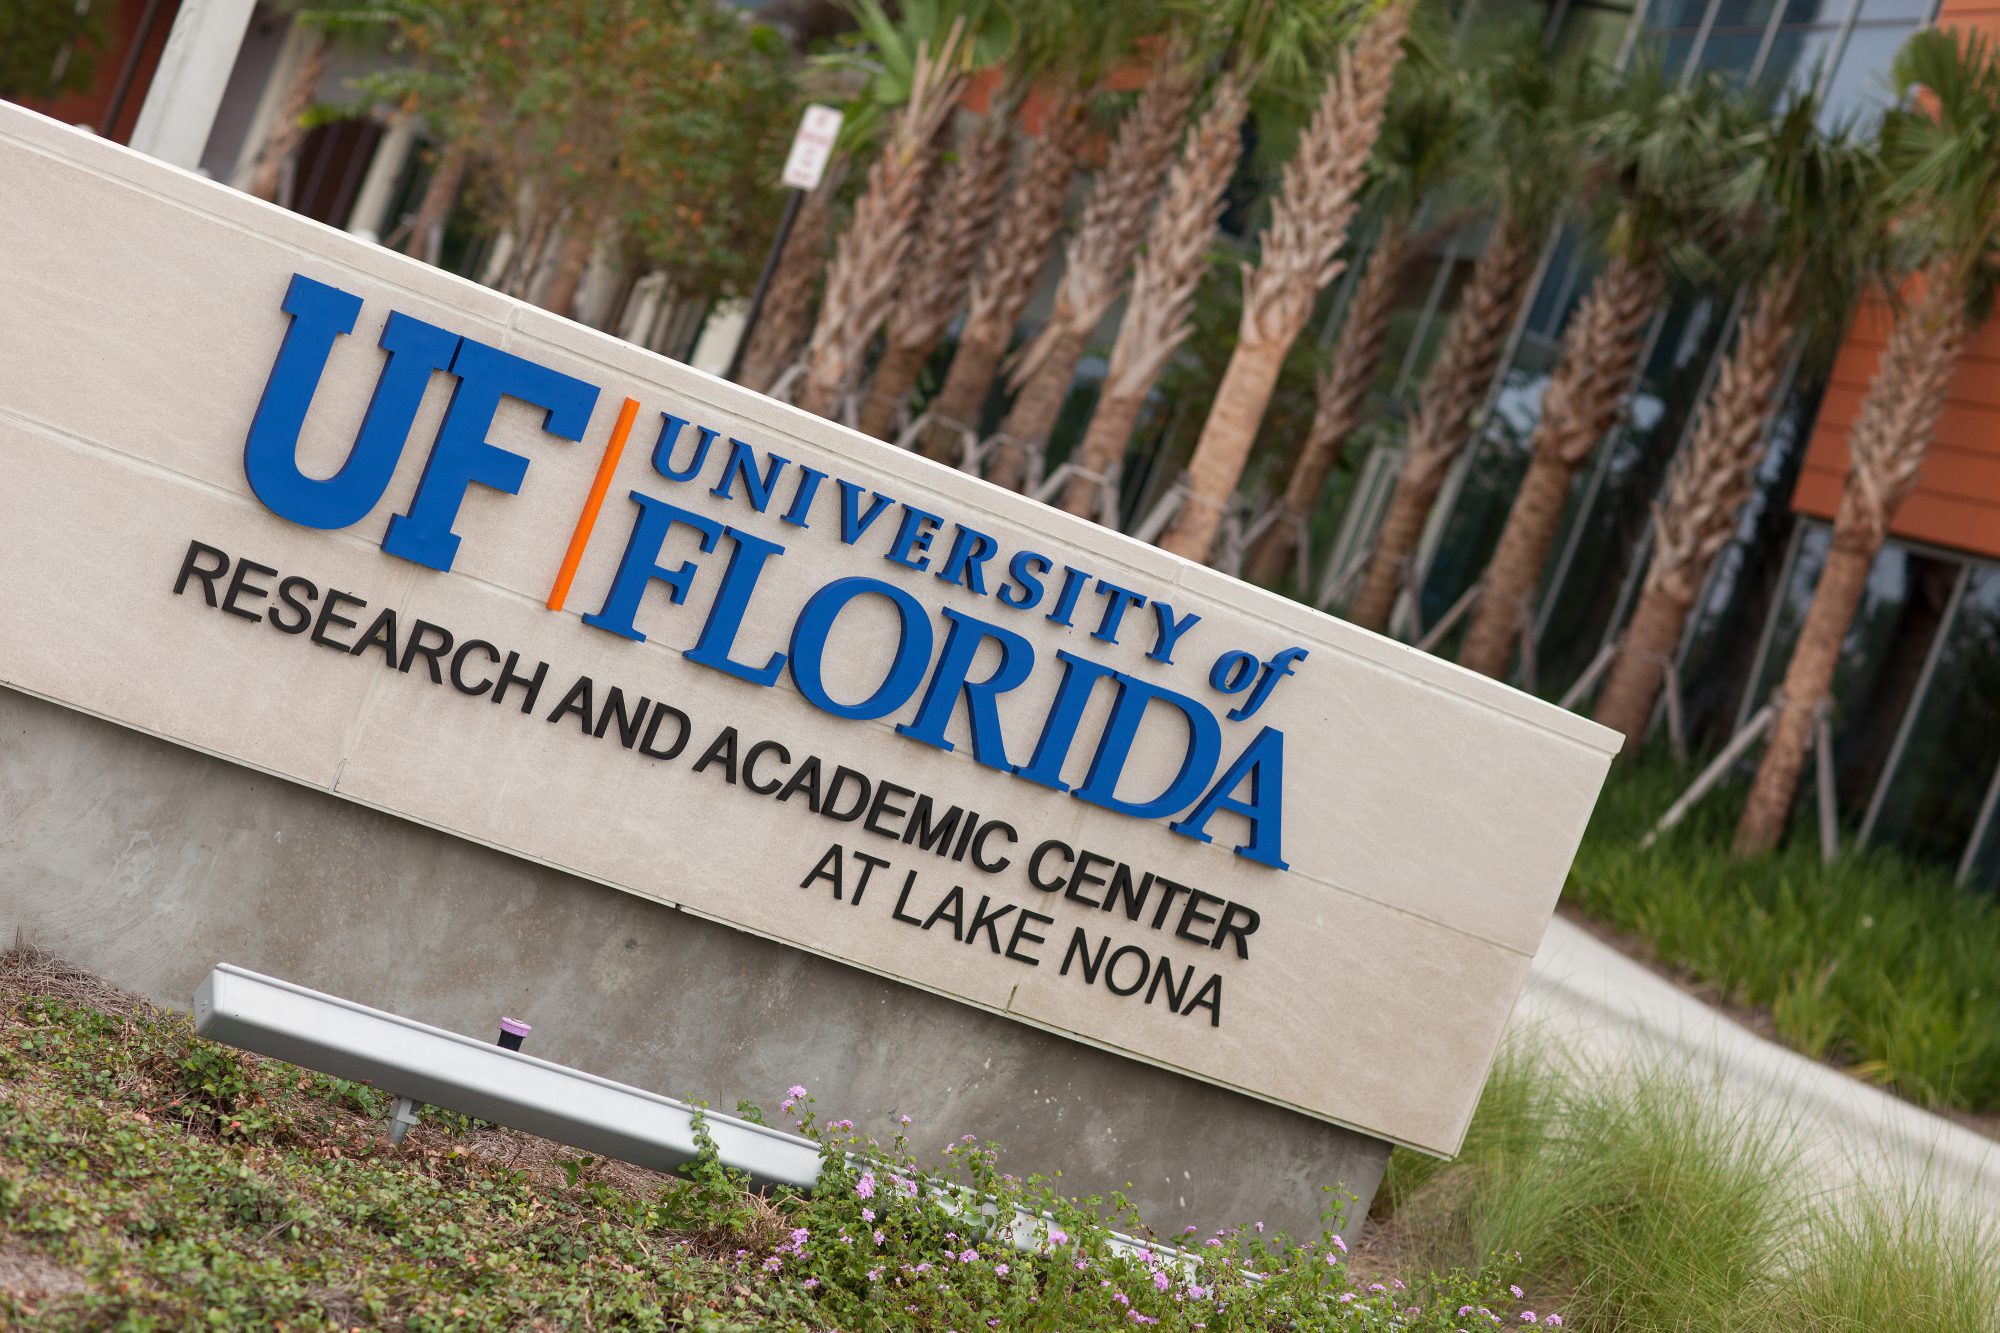 UF Research & Academic Center 4